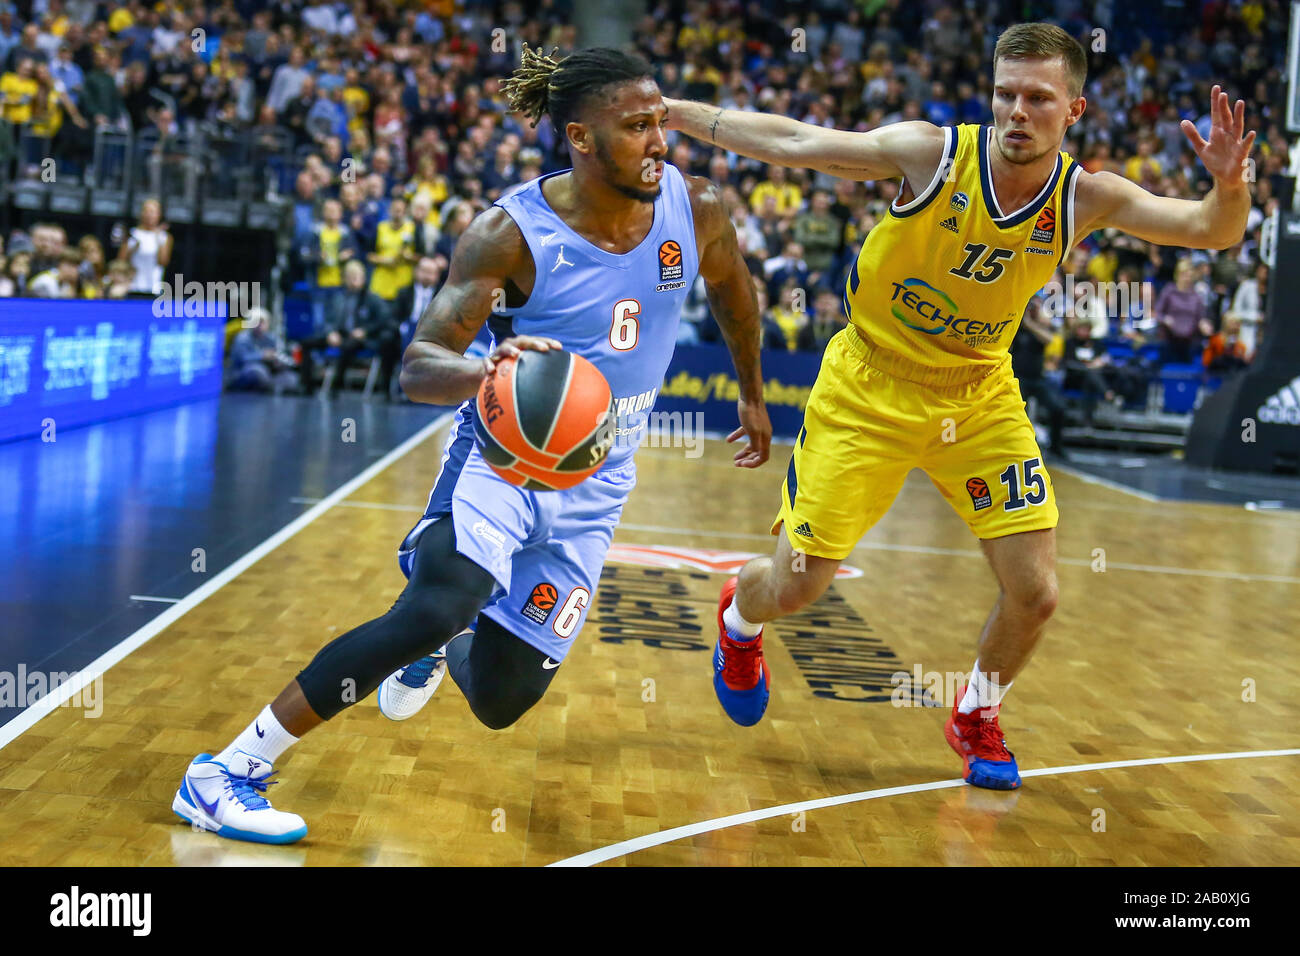 Berlin, Germany, October 04, 2019: Andrew Albicy of Zenit St Petersburg in  action during the EuroLeague basketball game between Alba Berlin and Zenit  Stock Photo - Alamy